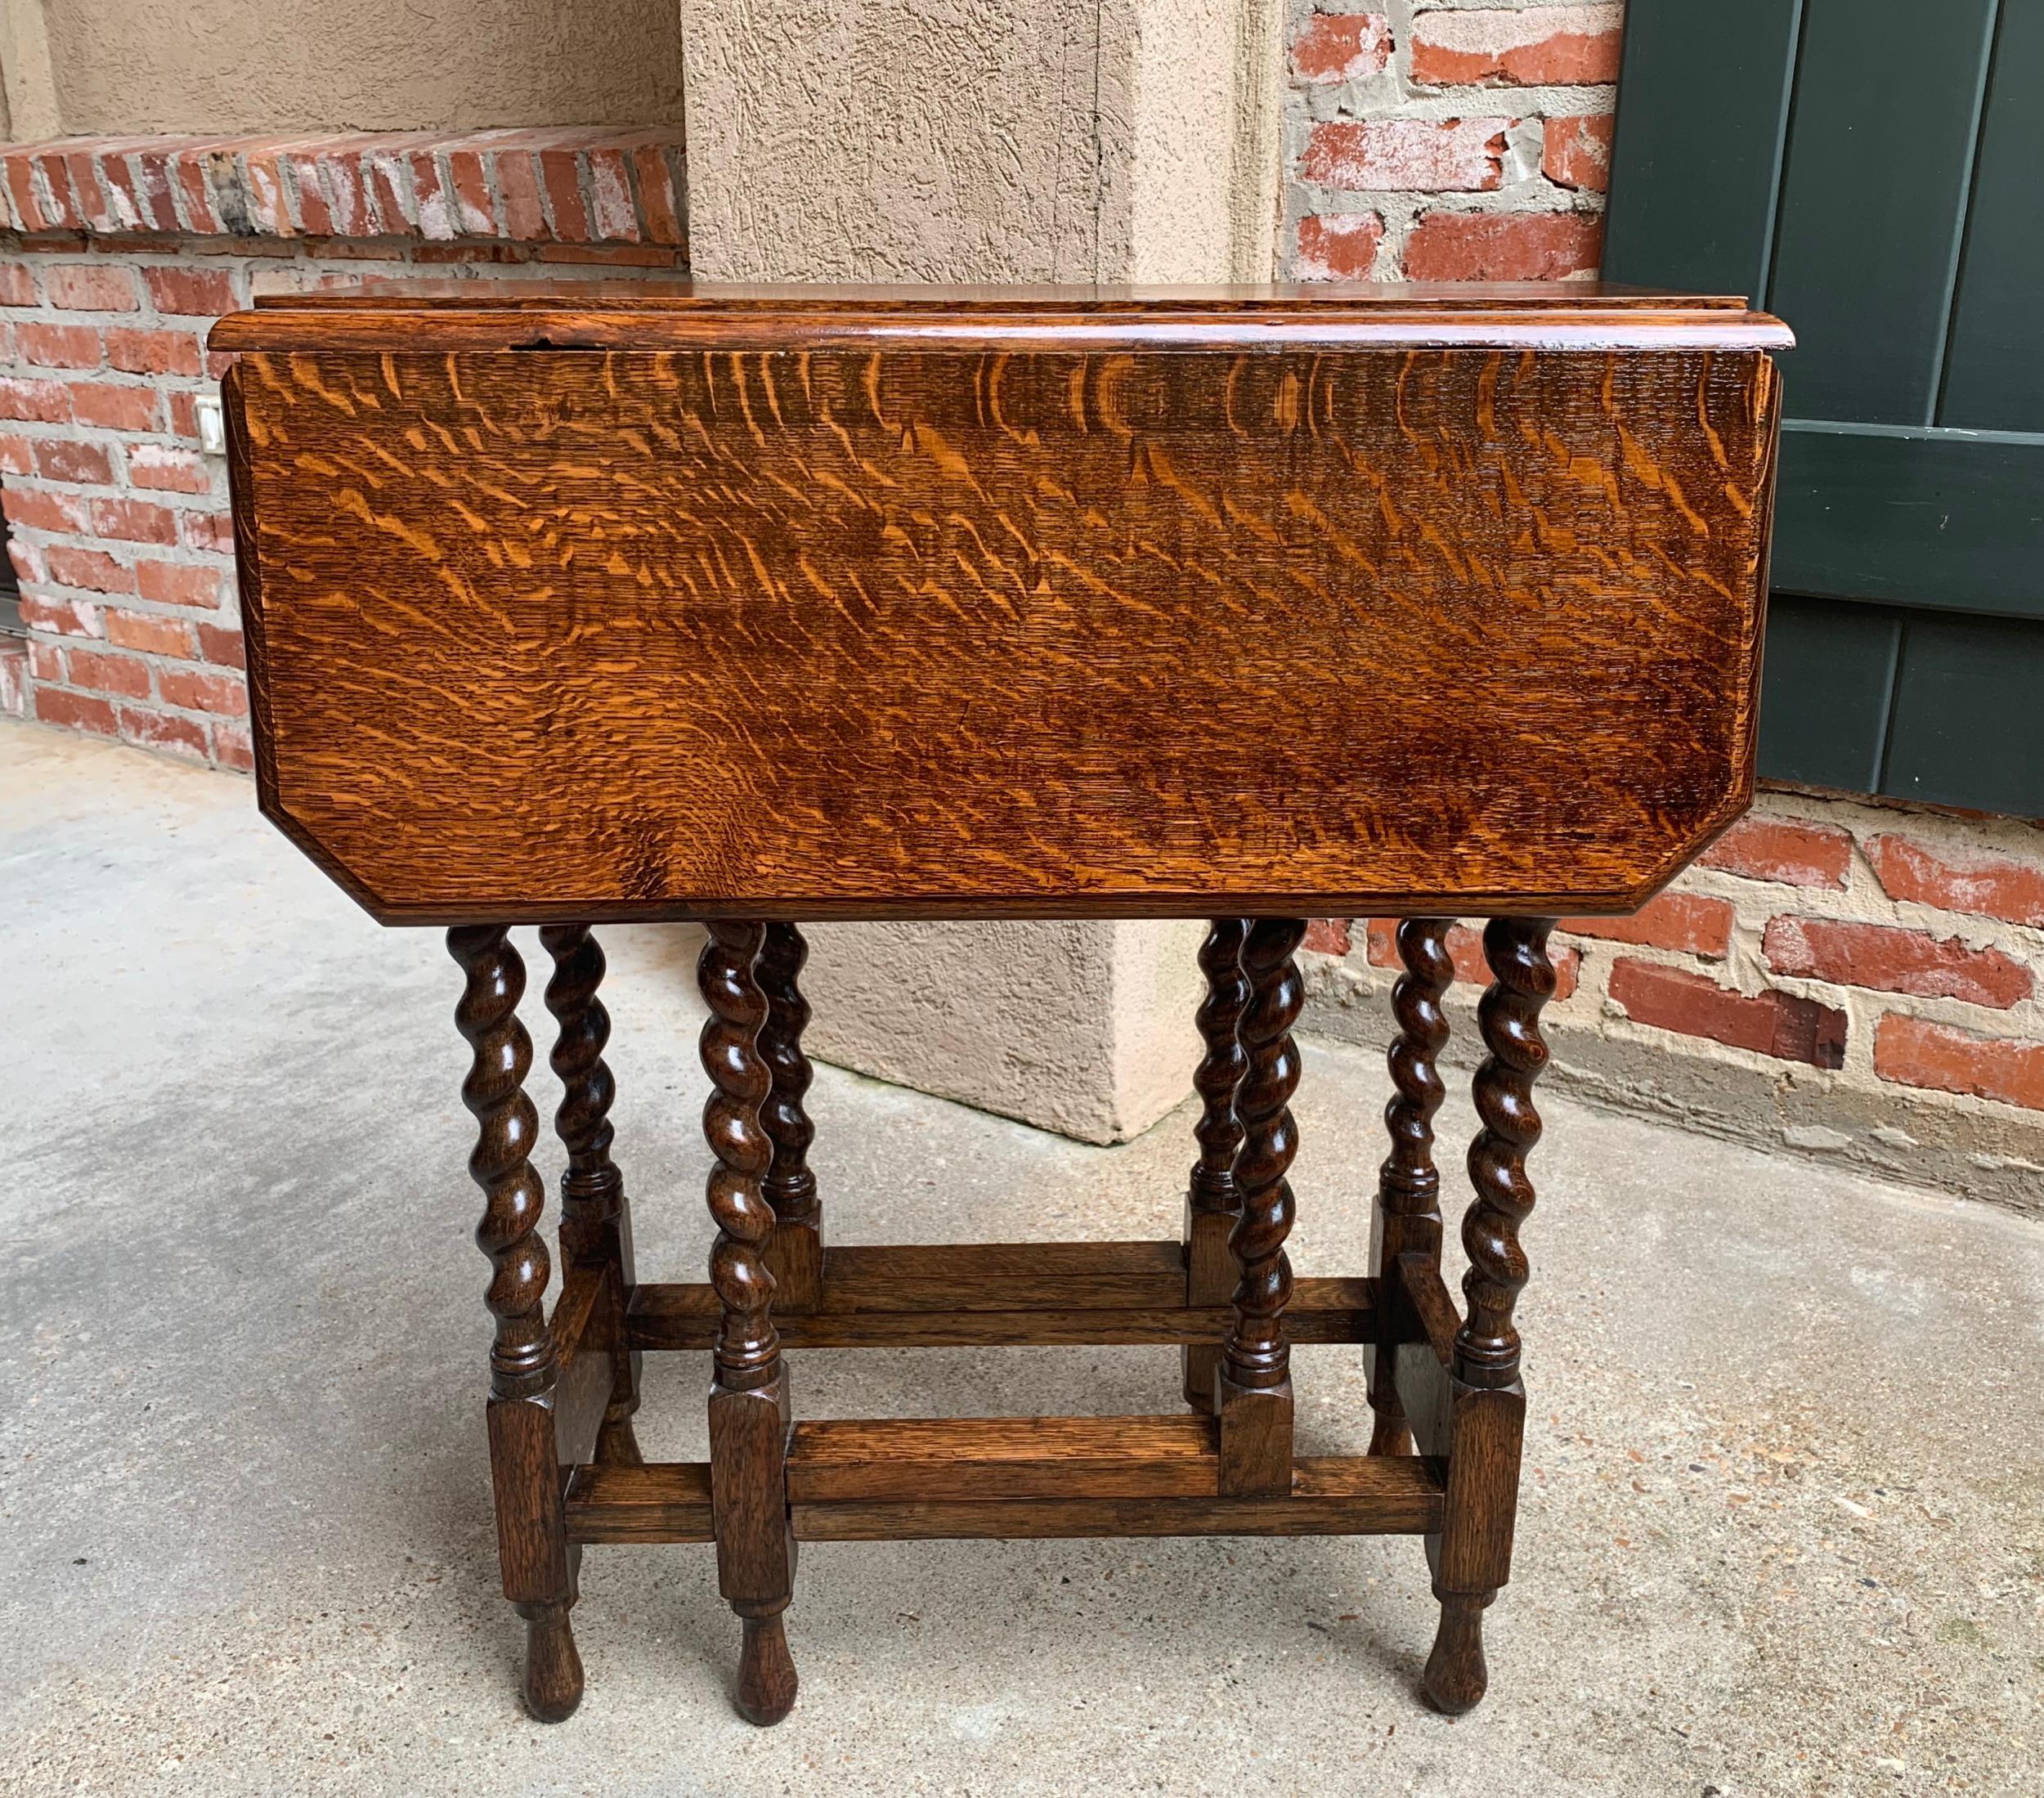 Petite antique English oak barley twist drop-leaf side sofa table, 20th century
 
~ Direct from England
~ A beautiful antique English oak gate leg, drop-leaf table with British barley twist legs on the table and gate legs
~ It is a very petite